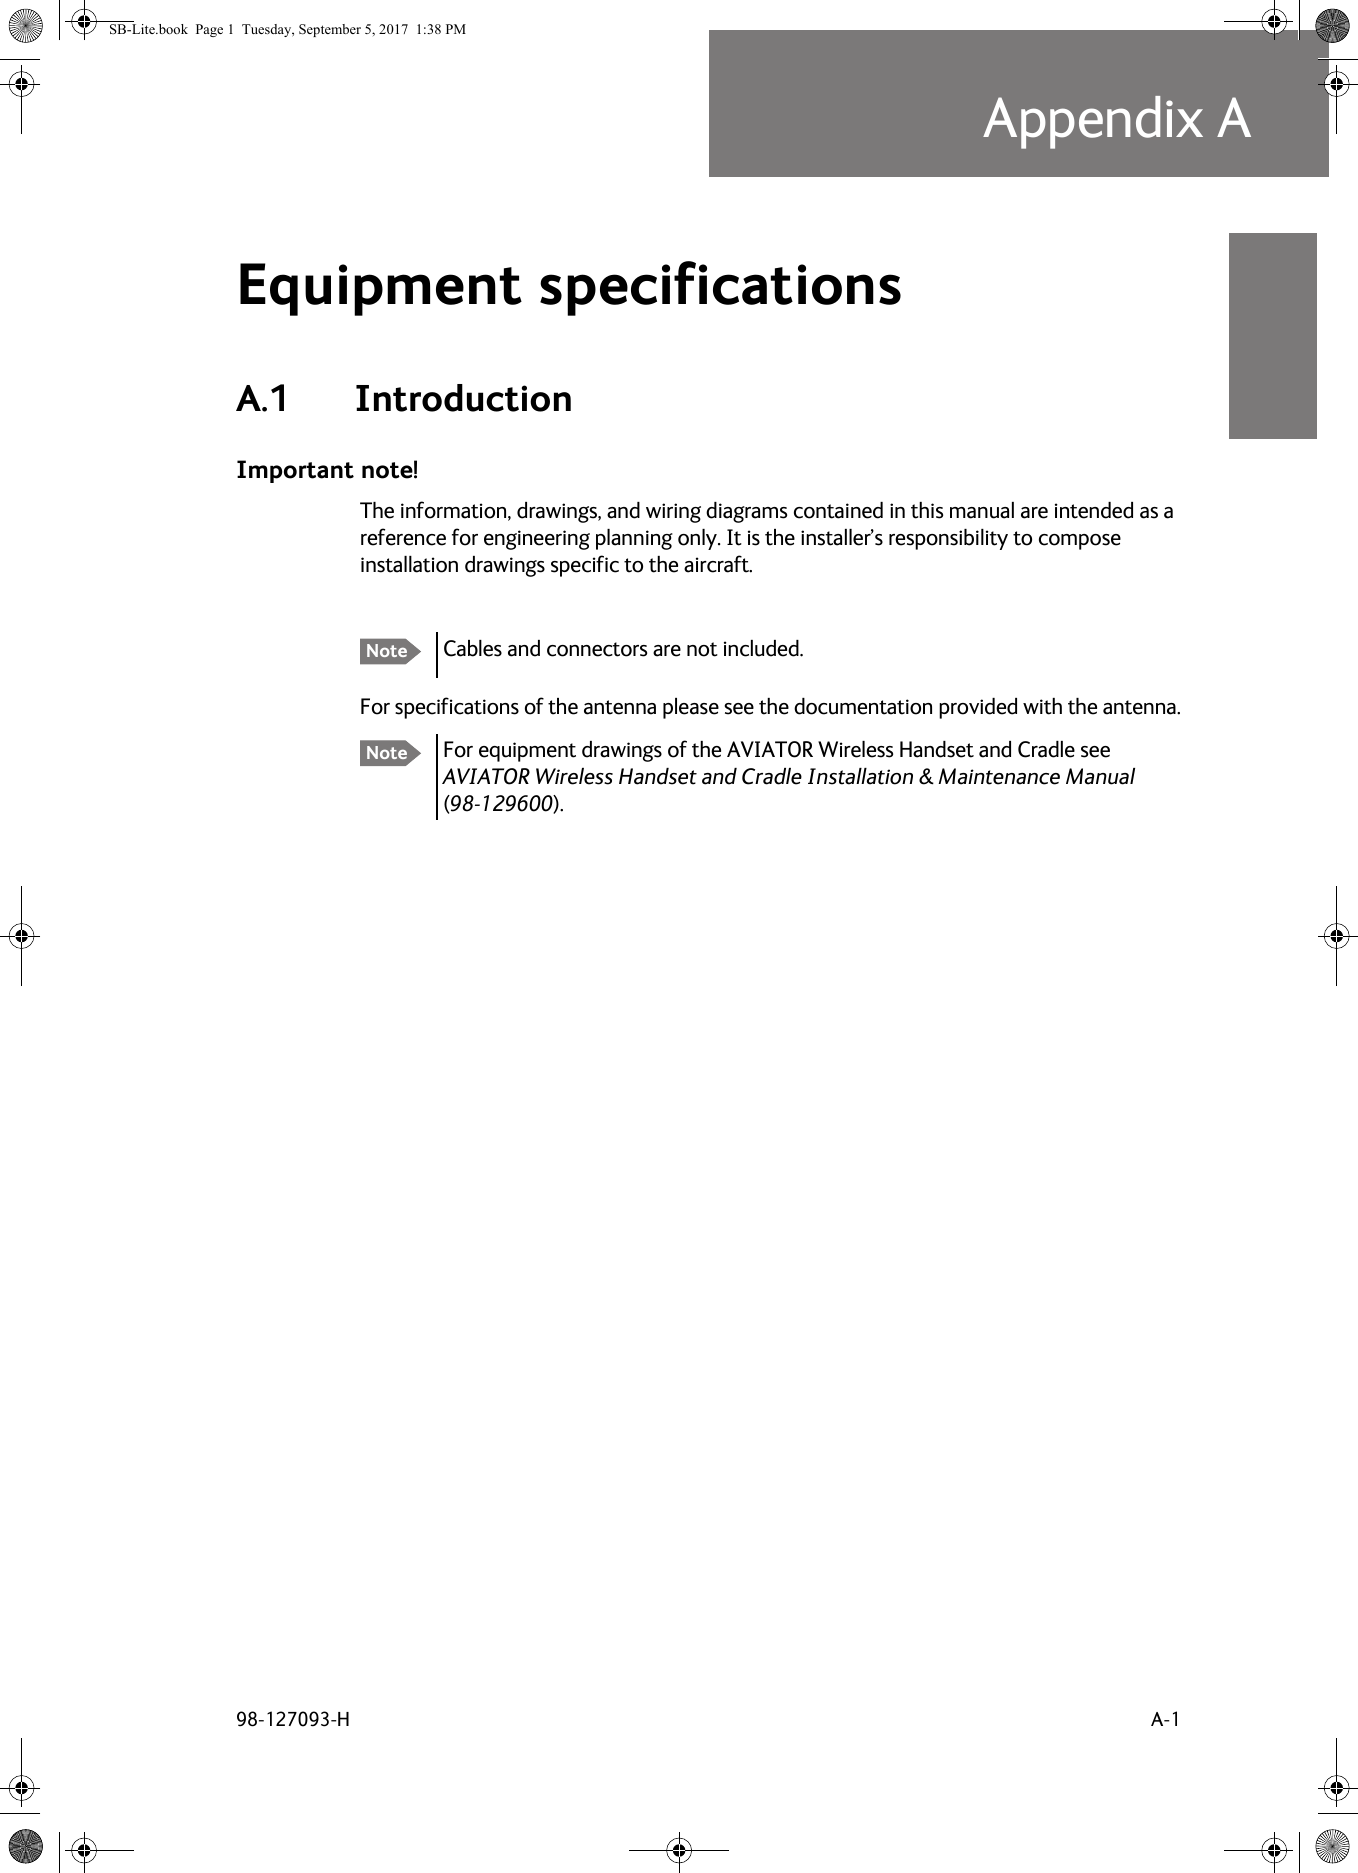 98-127093-H A-1Appendix AAAAAEquipment specifications AA.1 IntroductionImportant note!The information, drawings, and wiring diagrams contained in this manual are intended as a reference for engineering planning only. It is the installer’s responsibility to compose installation drawings specific to the aircraft. For specifications of the antenna please see the documentation provided with the antenna.For equipment drawings of the AVIATOR Wireless Handset and Cradle see AVIATOR Wireless Handset and Cradle Installation &amp; Maintenance Manual (98-129600). Note Cables and connectors are not included. NoteSB-Lite.book  Page 1  Tuesday, September 5, 2017  1:38 PM